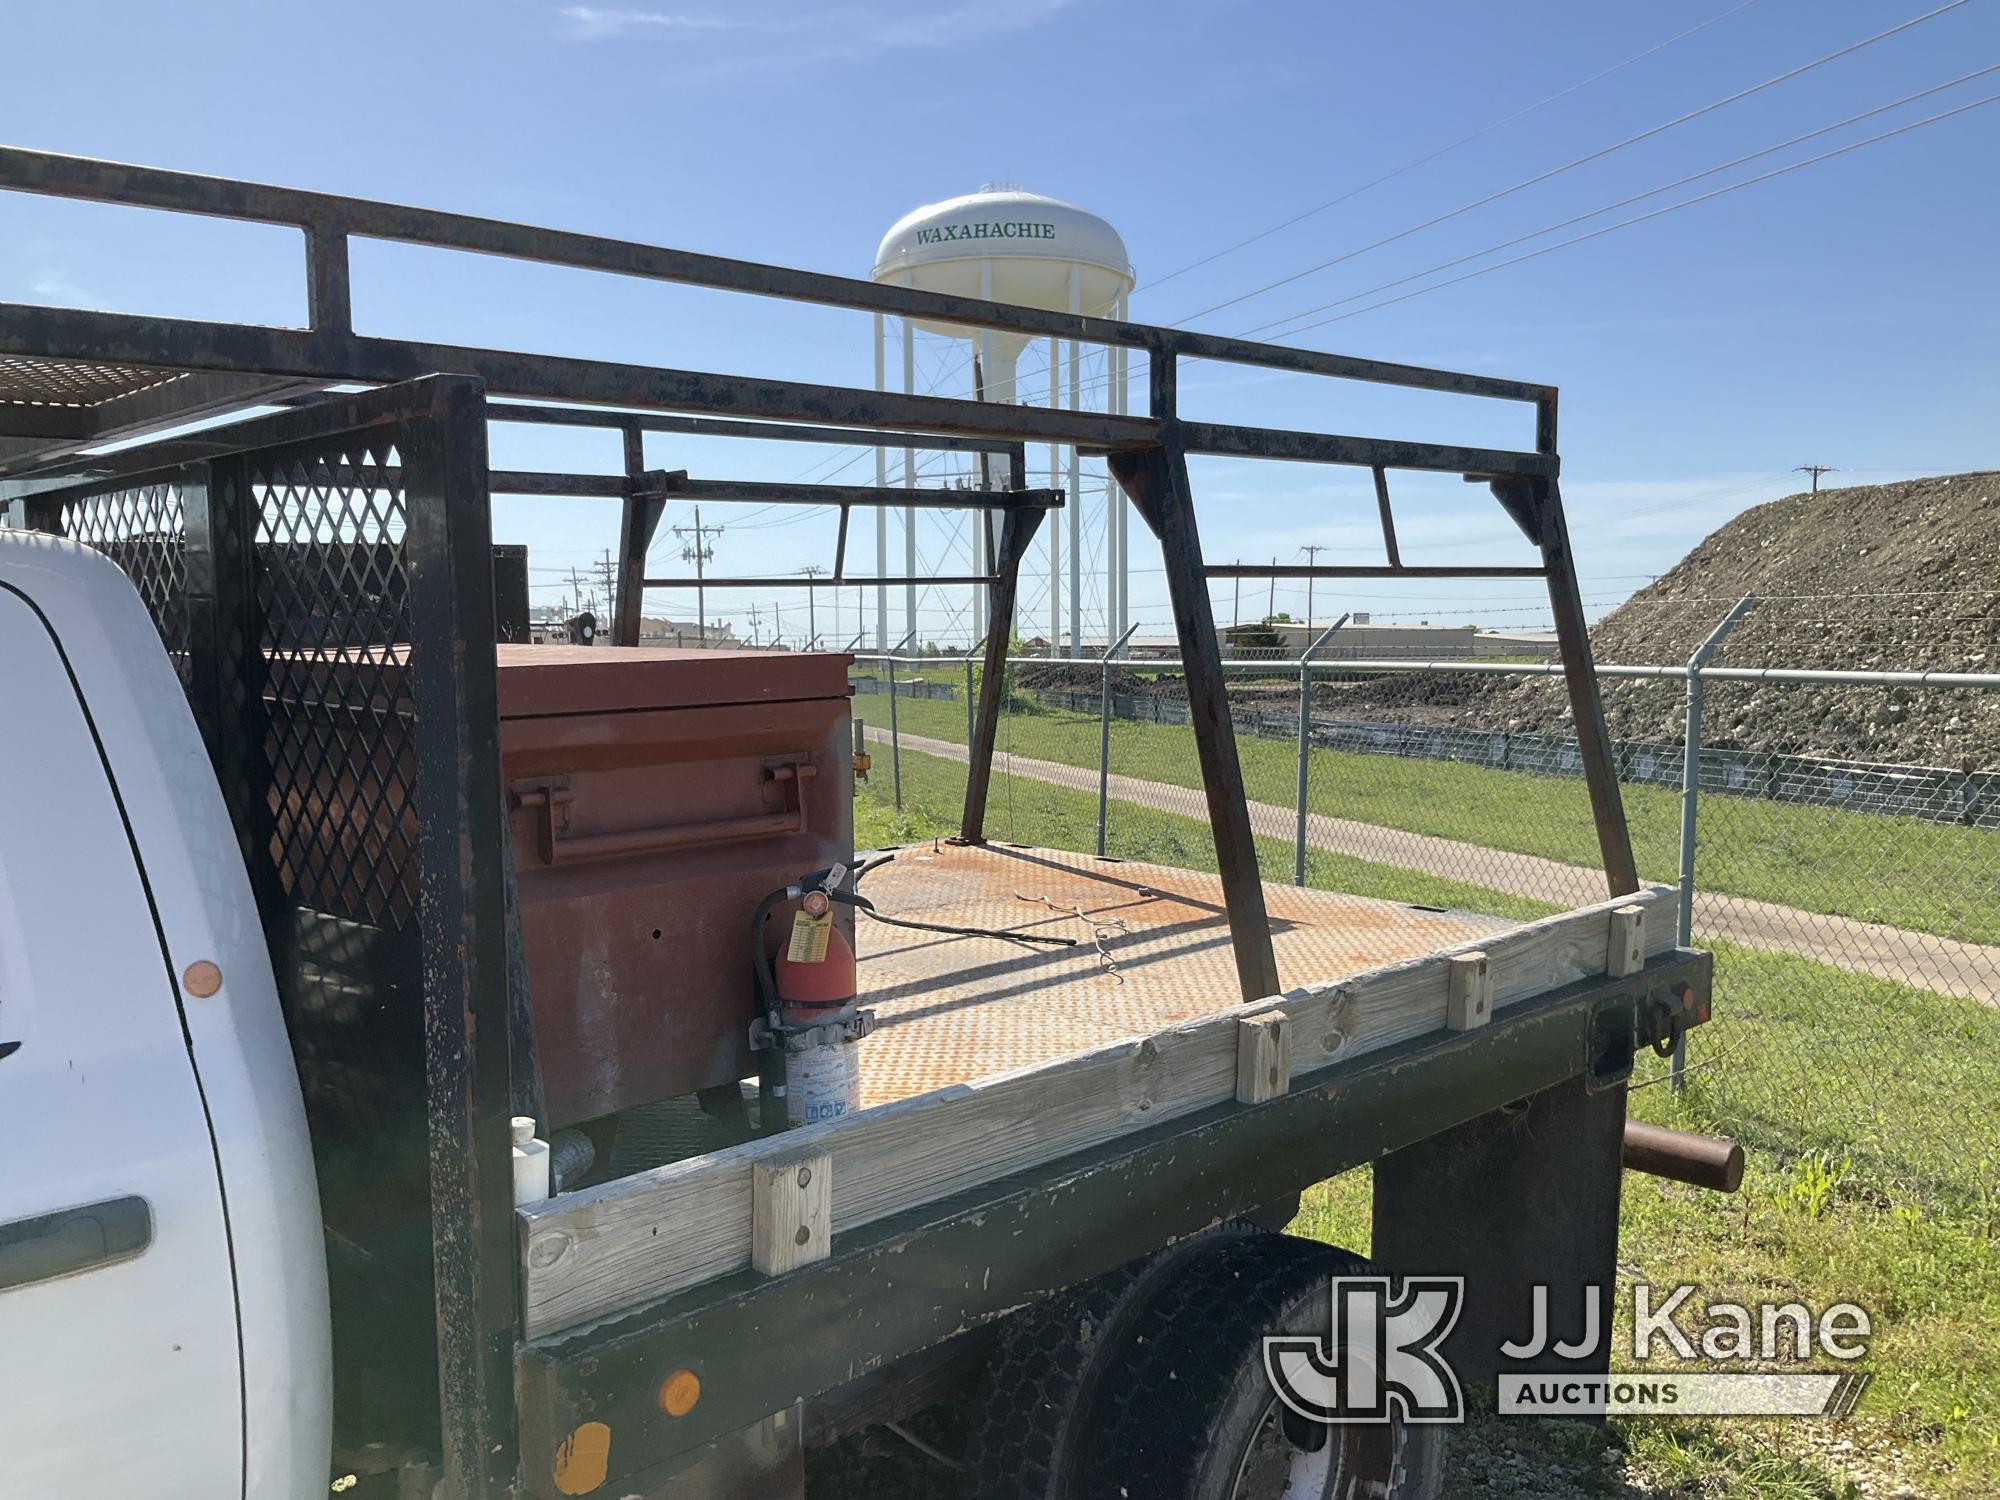 (Waxahachie, TX) 2012 Dodge Ram 4500 4x4 Crew-Cab Flatbed Truck Not Running, Conditions Unknown) (Ch